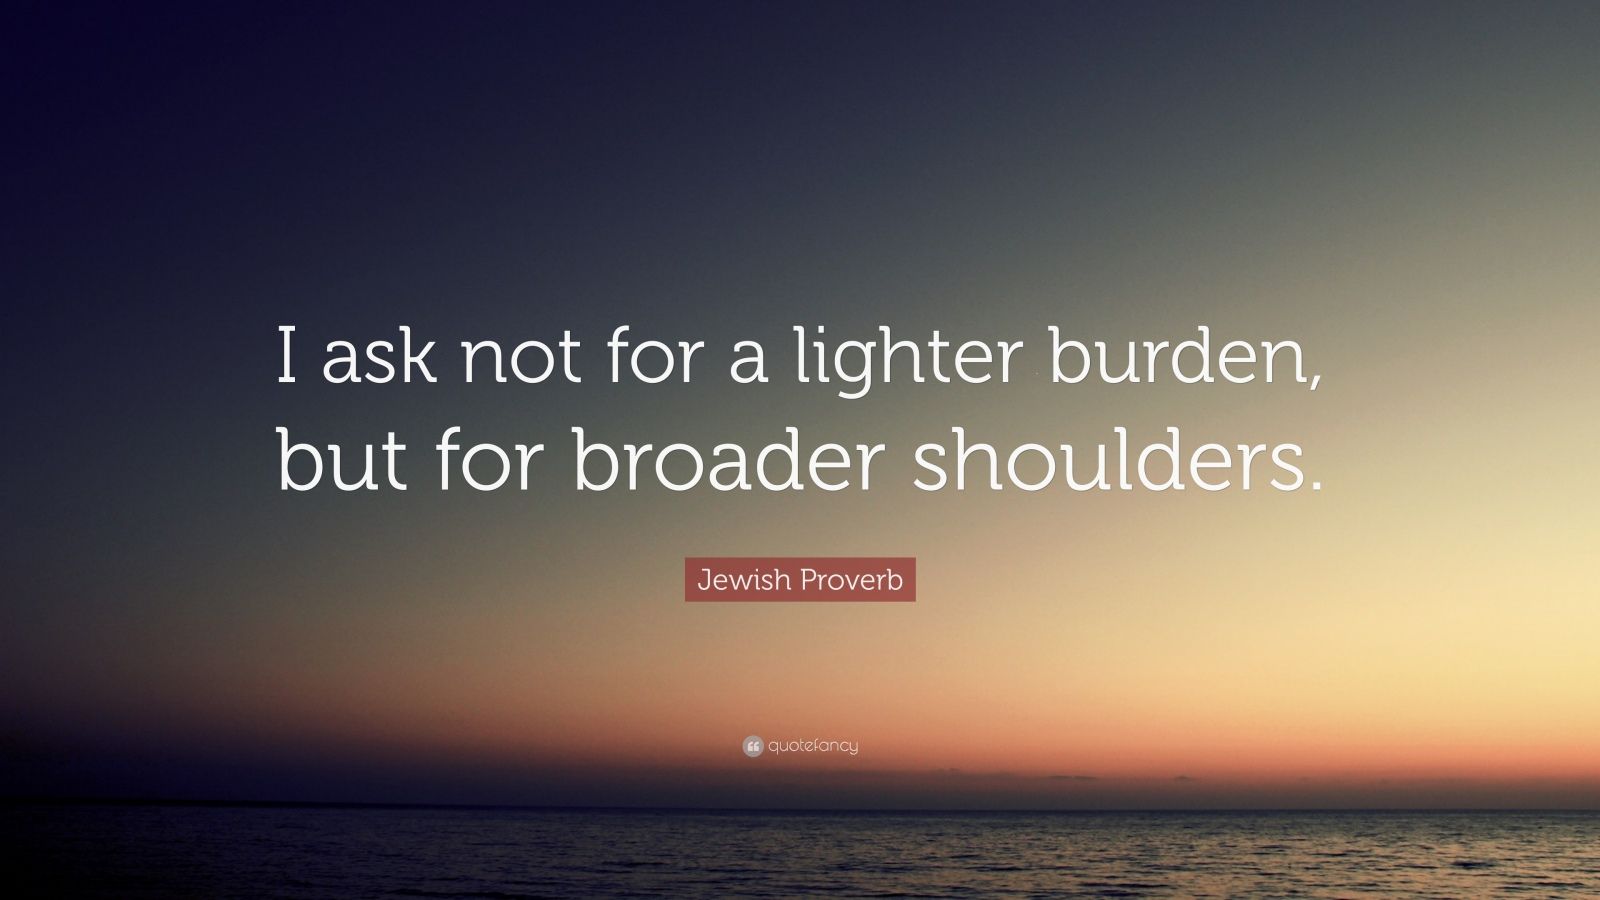 1703914-Jewish-Proverb-Quote-I-ask-not-for-a-lighter-burden-but-for.jpg